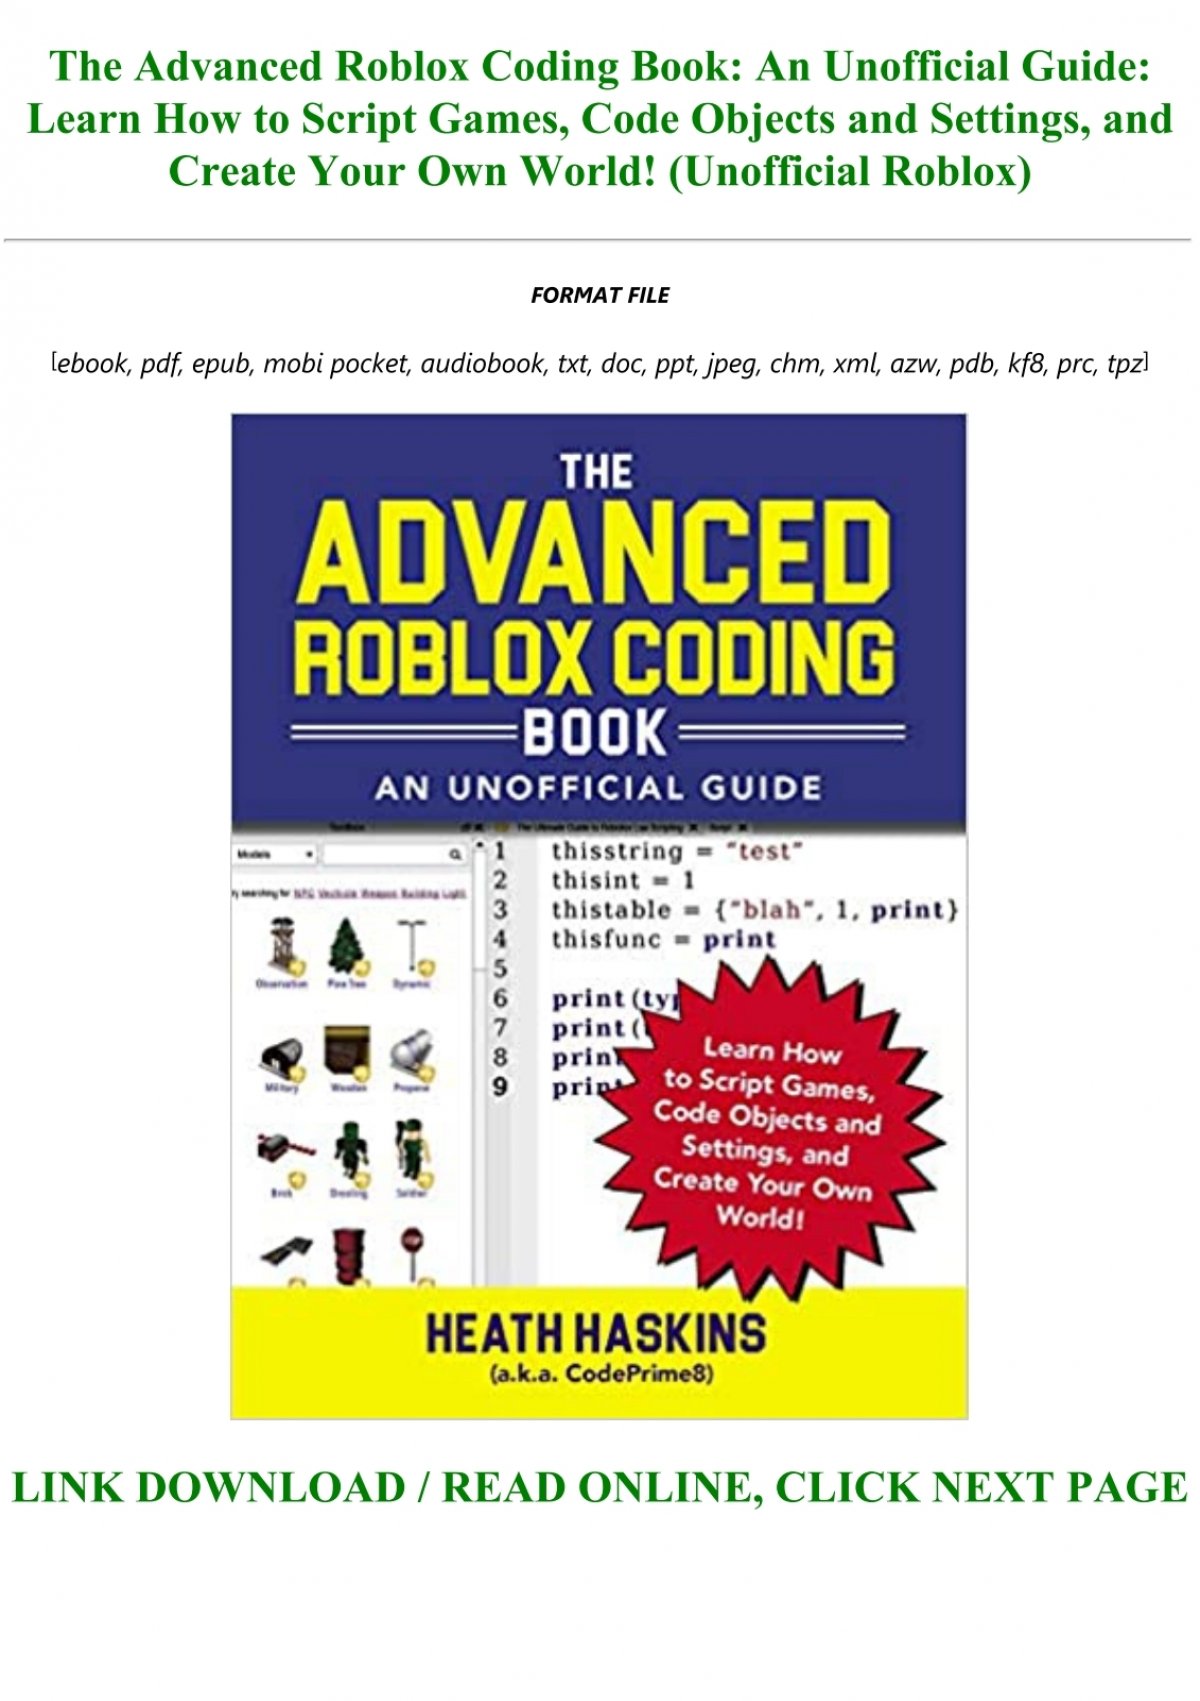 Download Pdf The Advanced Roblox Coding Book An Unofficial Guide Learn How To Script Games Code Objects And Settings And Create Your Own World Unofficial Roblox Pre Order - download the ultimate guide to roblox coding games